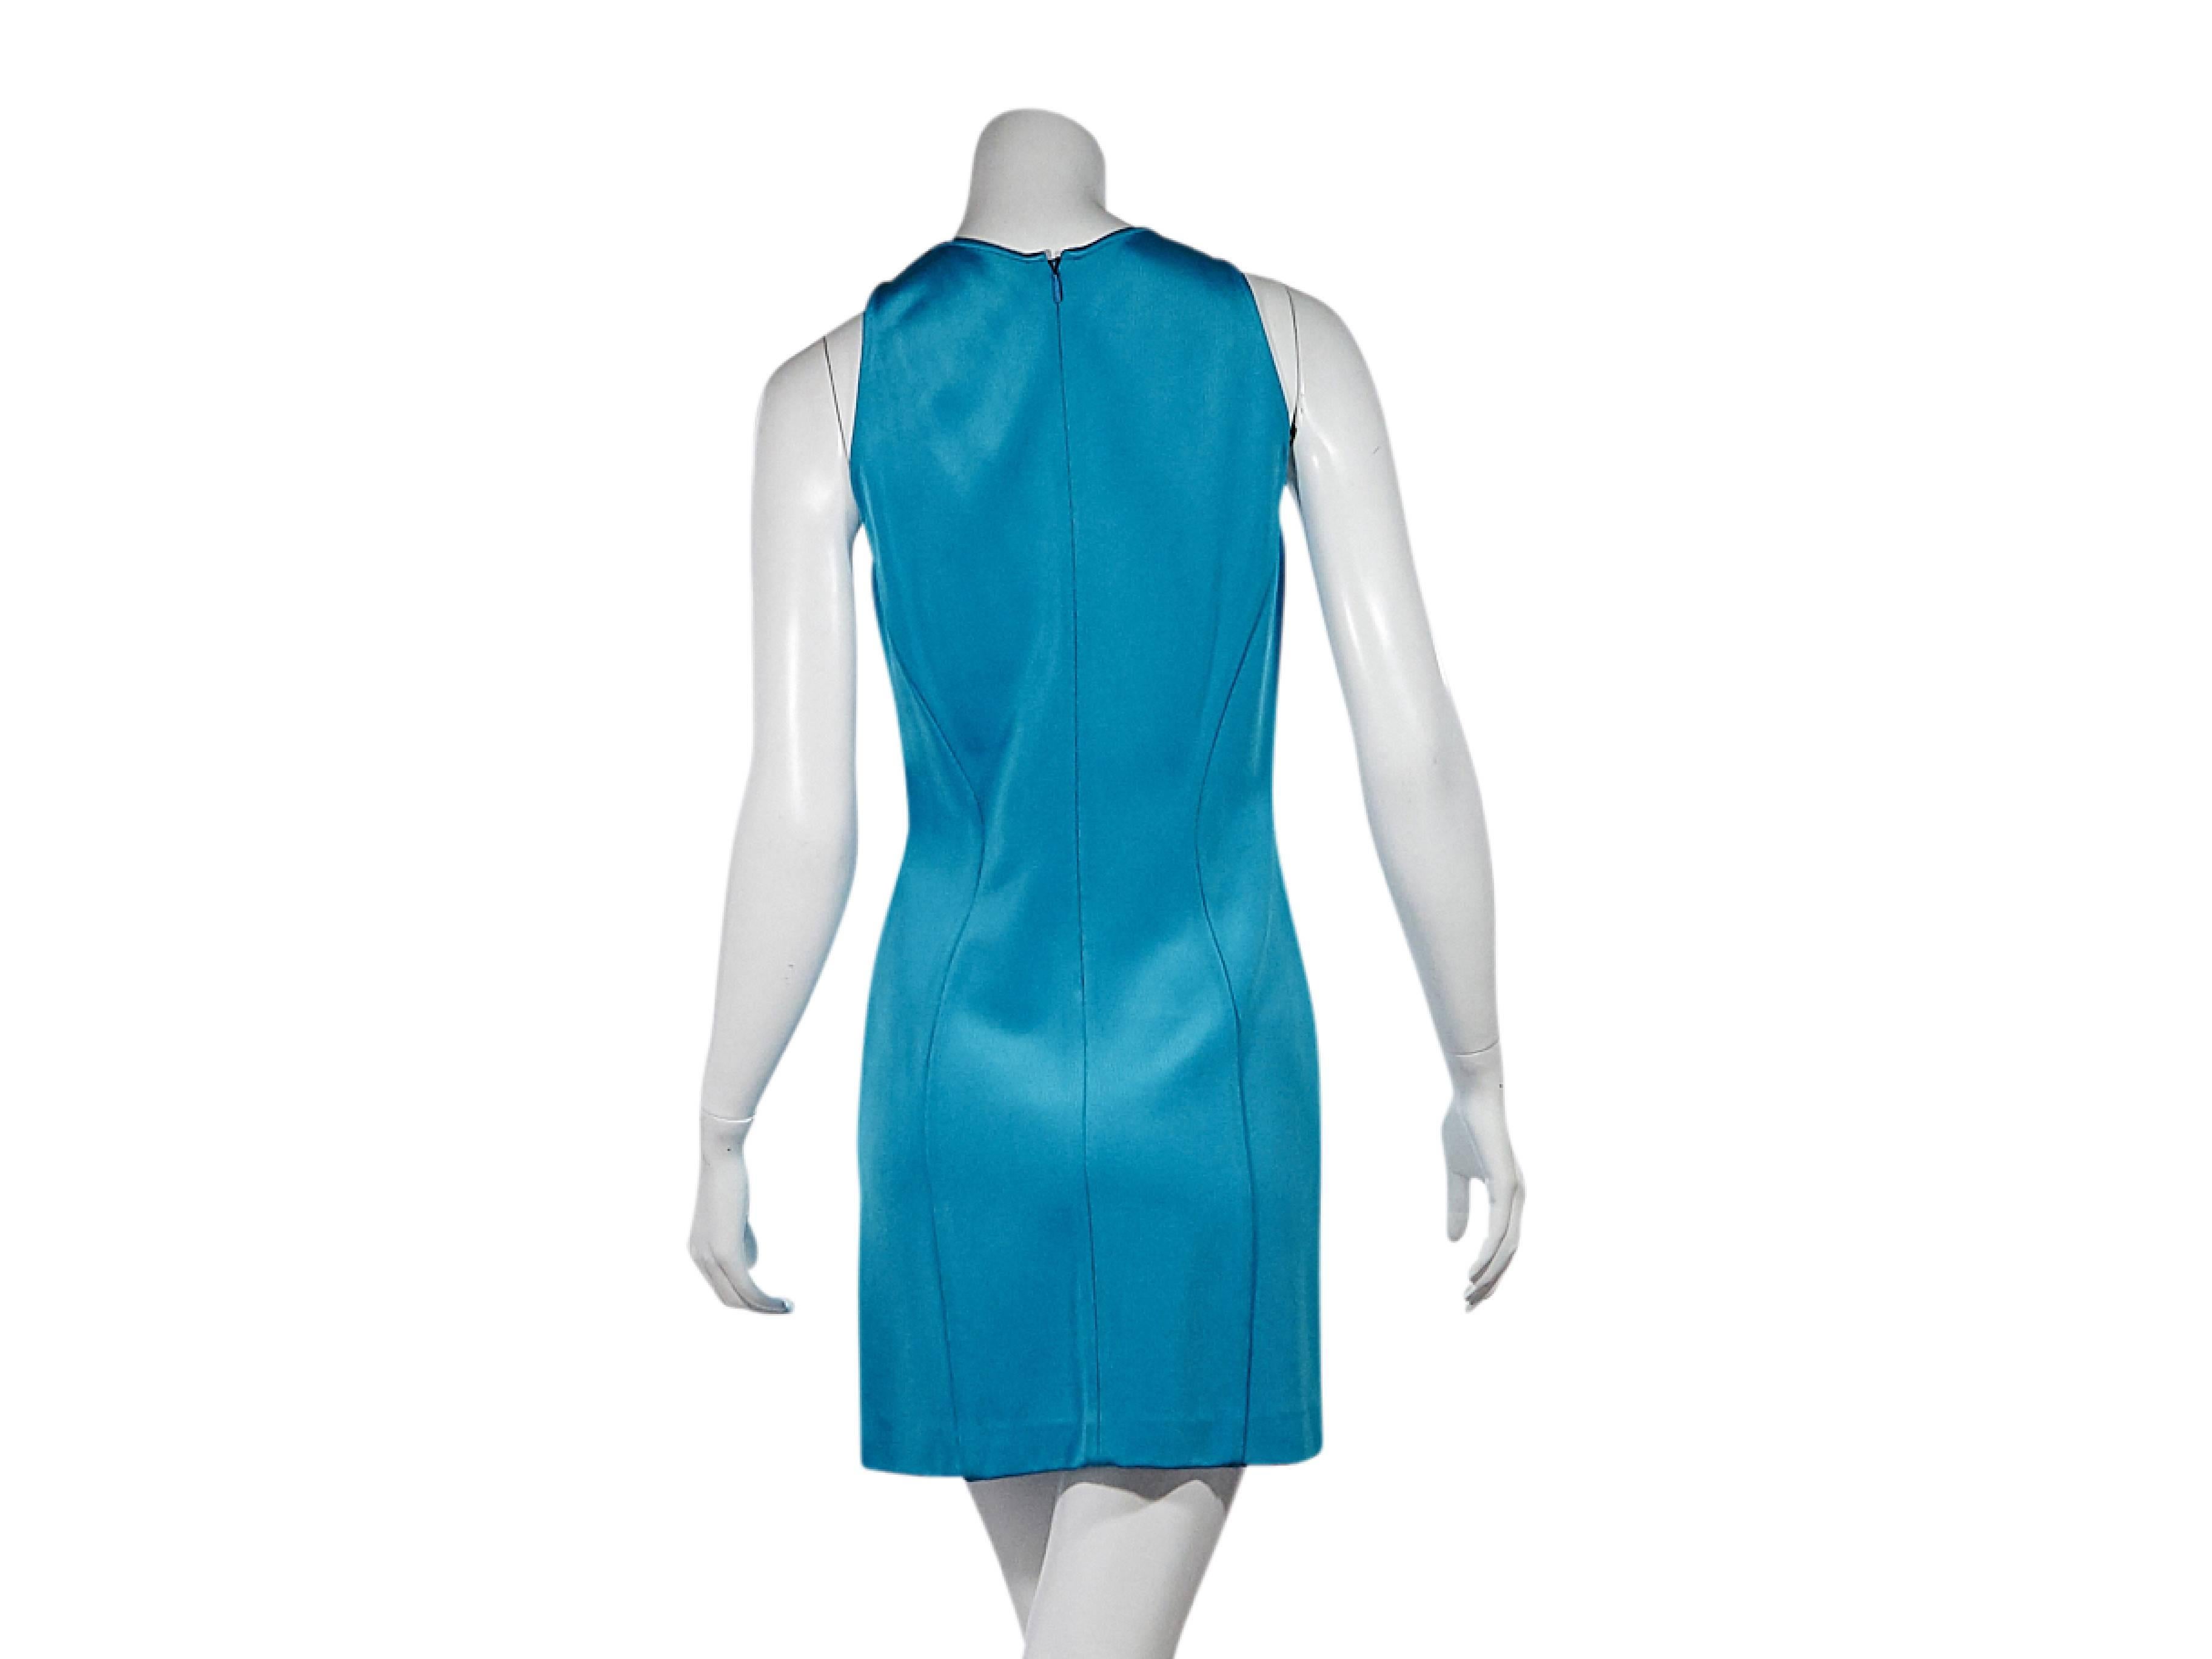 Product details:  Blue sheath dress by Versace.  Accented with goldtone buttons.  Jewelneck.  Sleeveless.  Flattering seam details.  Concealed back zip closure.  Size 8
Condition: Pre-owned. Very good.

Est. Retail $ 698.00